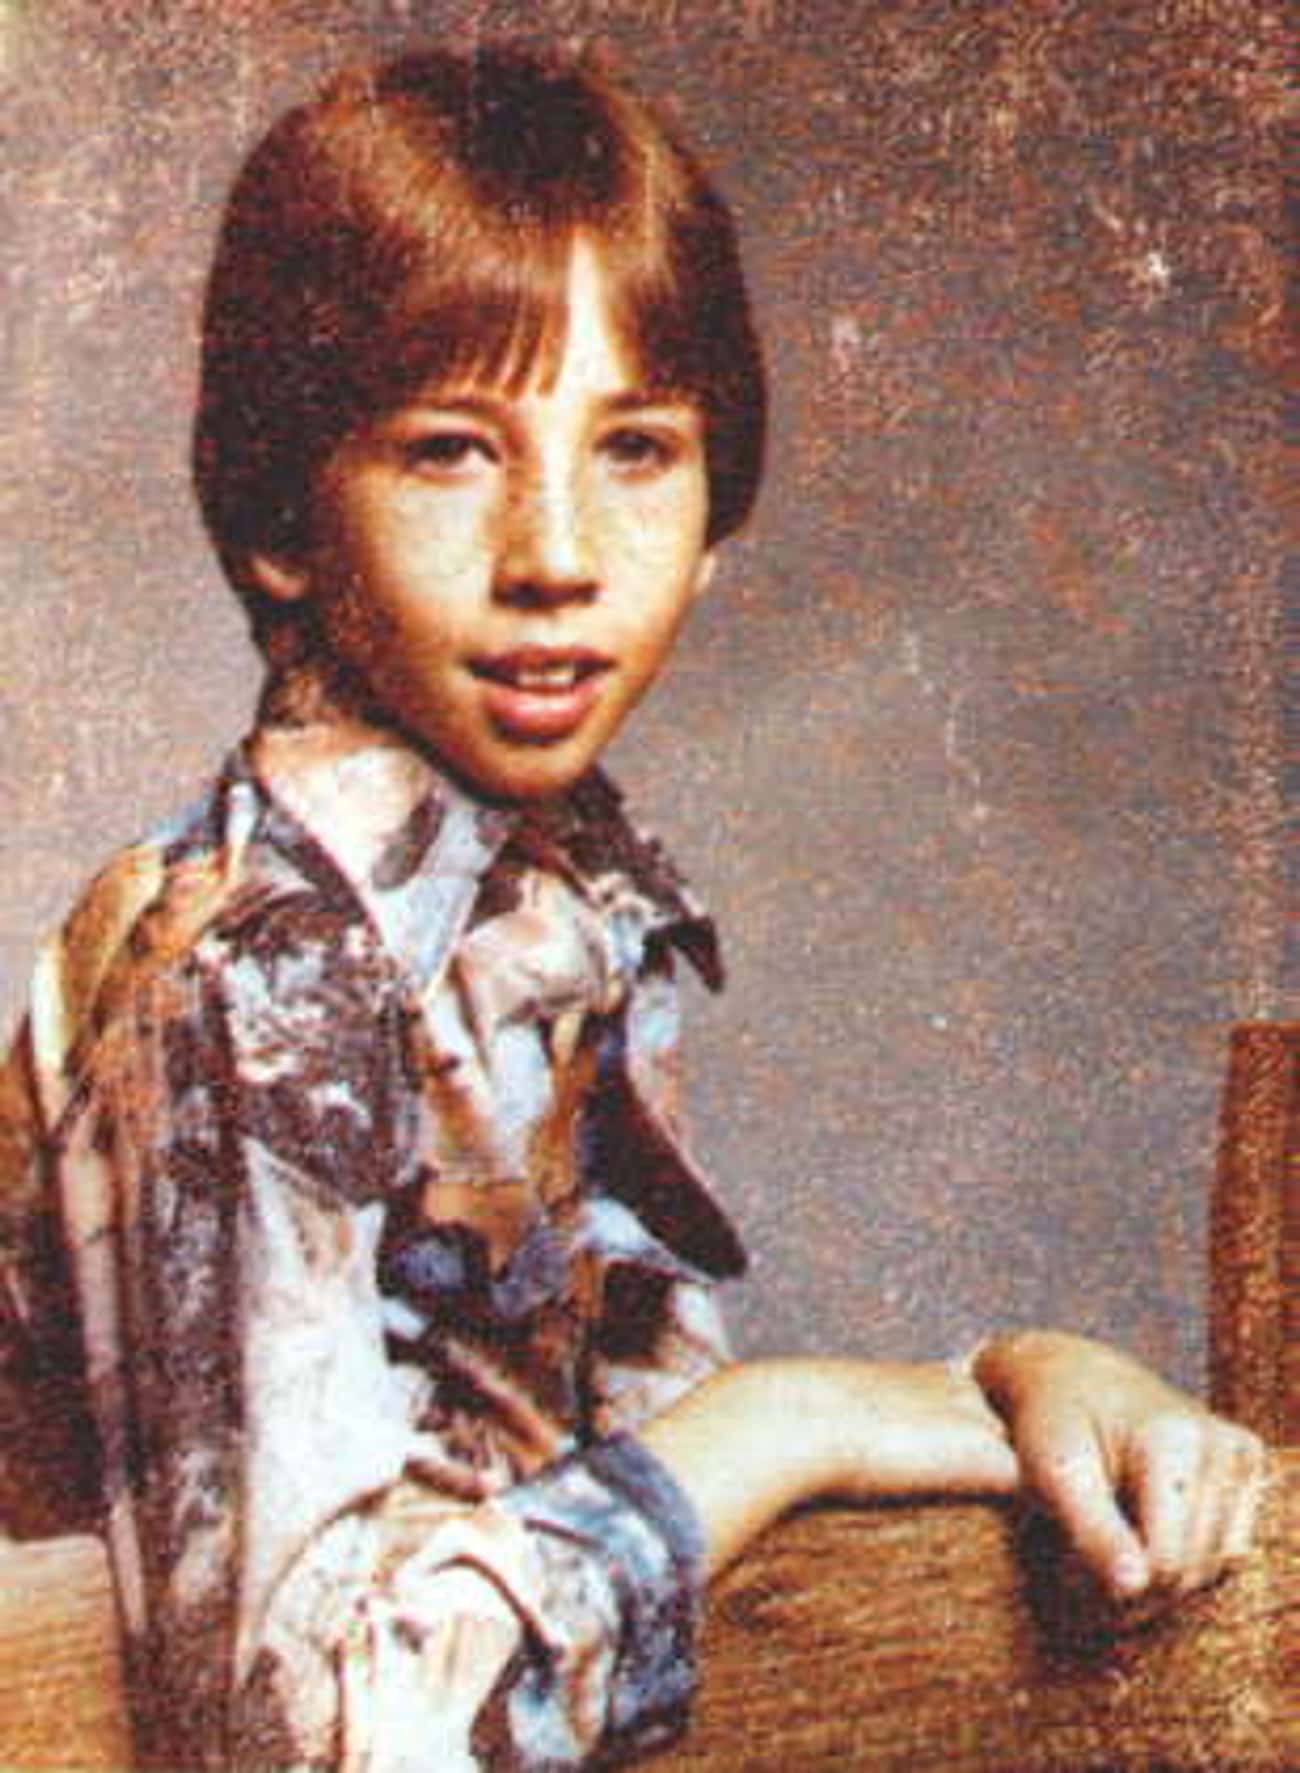 Young Marilyn Manson in Patterned Shirt